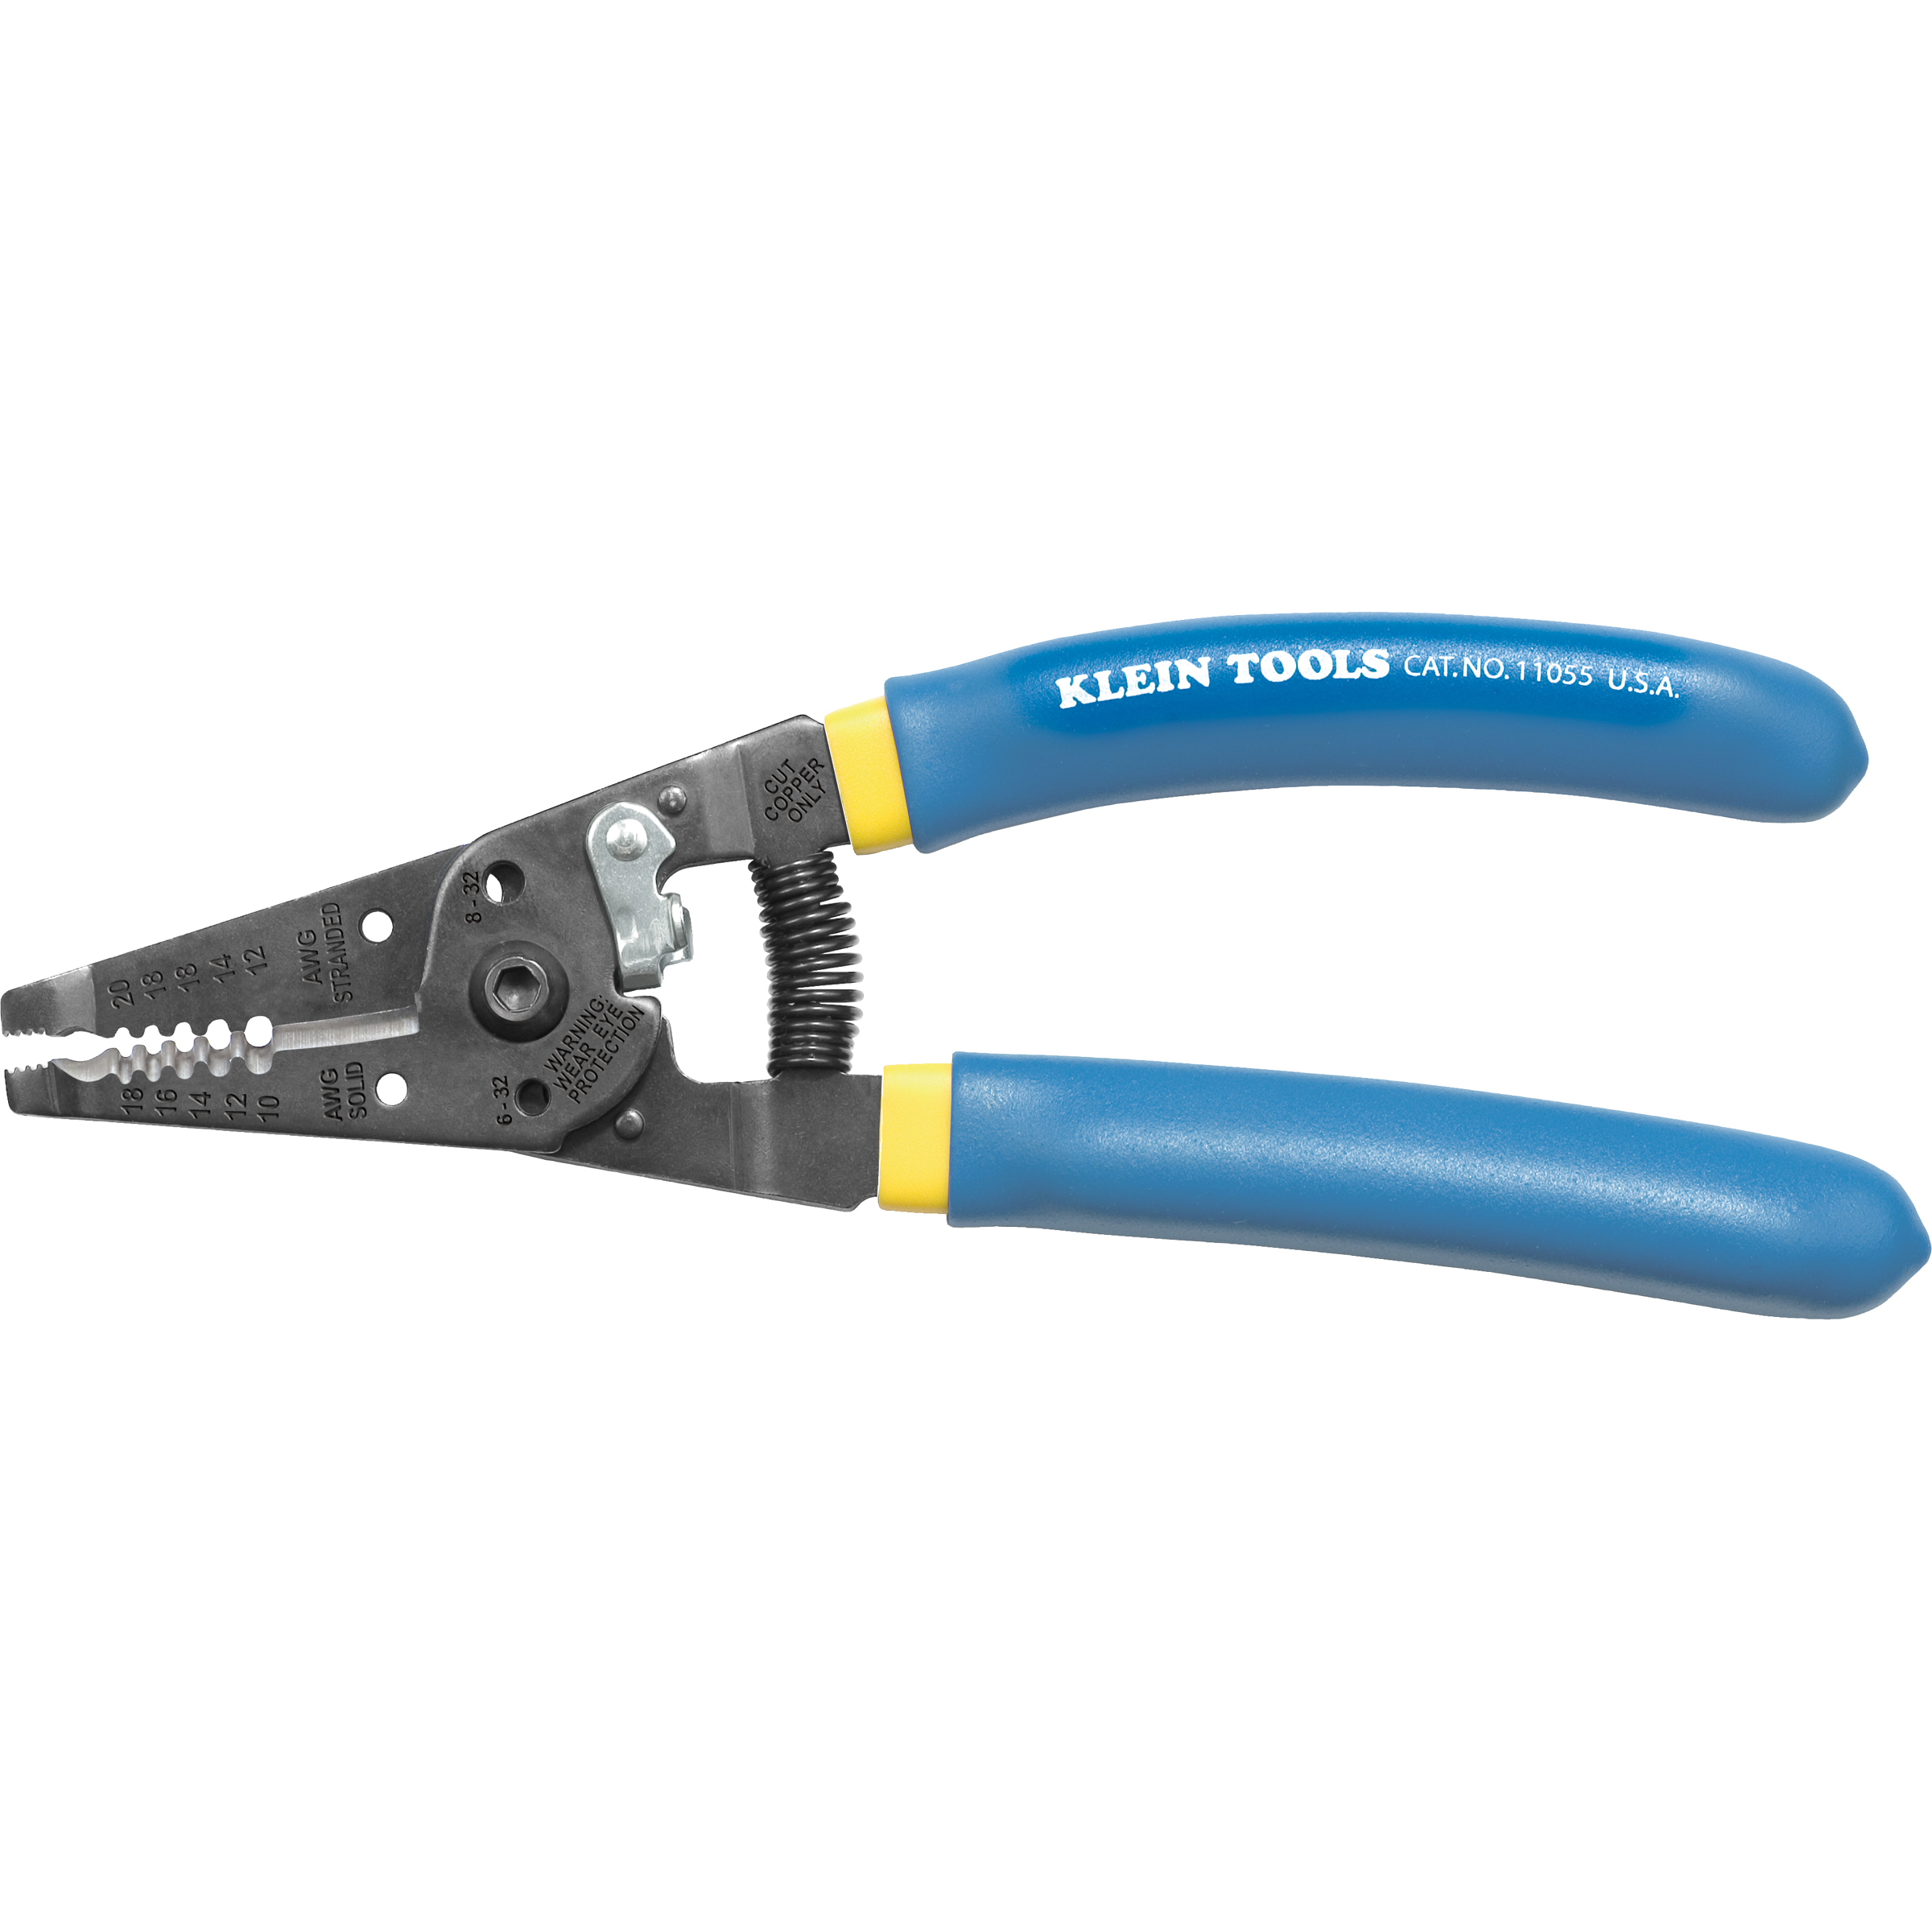 Klein Tools 11055 Wire Cutter and Wire Stripper, Stranded Wire Cutter, Solid Wire Cutter, Cuts Copper Wire - image 1 of 7